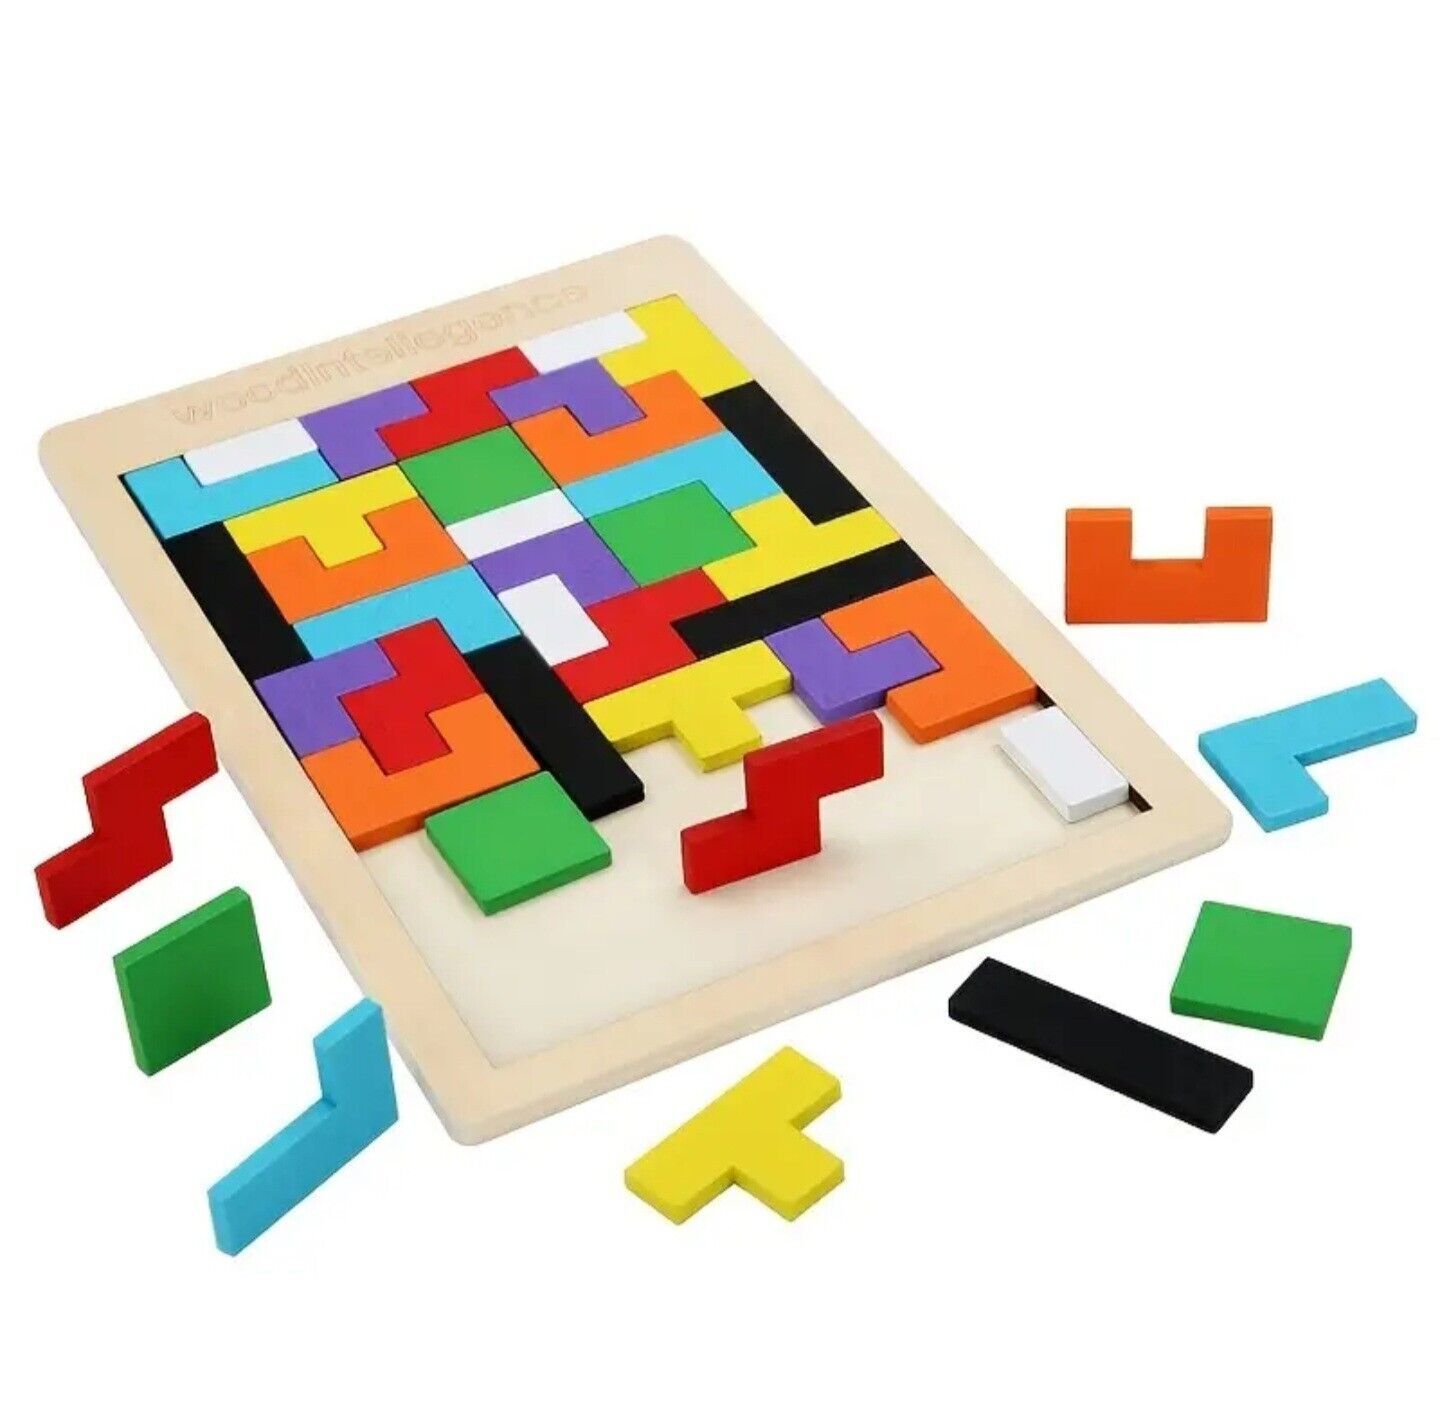 Primary image for Puzzle Jigsaw Wooden Educational Kids Game Tetris Toy 10.6 x 7 in NEW Age 8 - 11